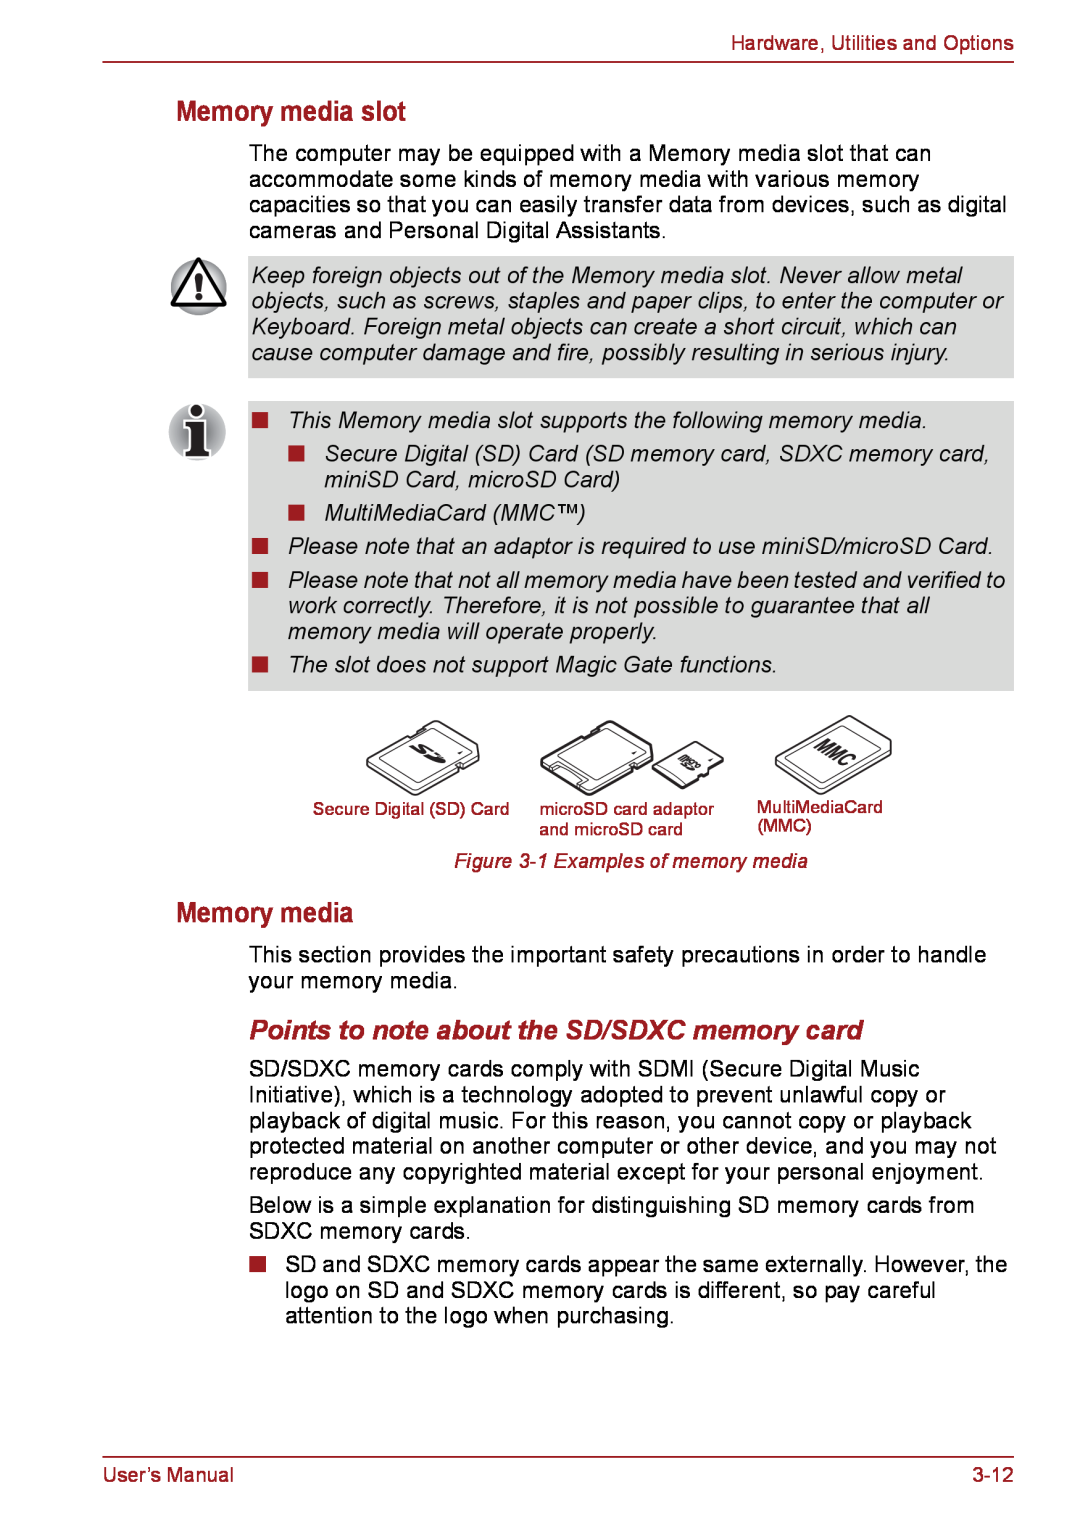 Toshiba PSC08U-02D01D user manual Memory media slot, Points to note about the SD/SDXC memory card 